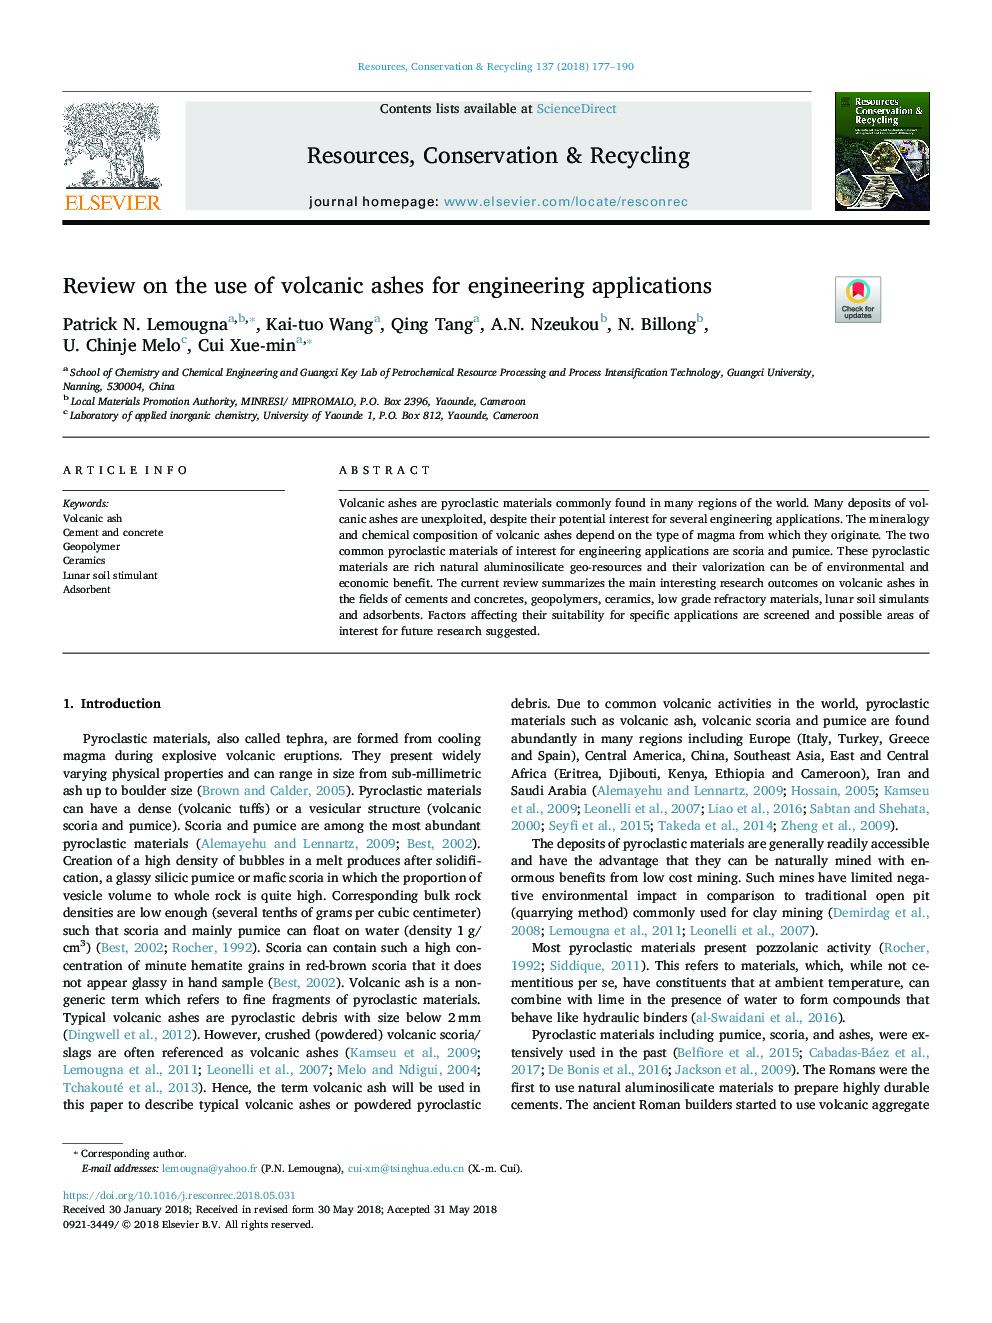 Review on the use of volcanic ashes for engineering applications